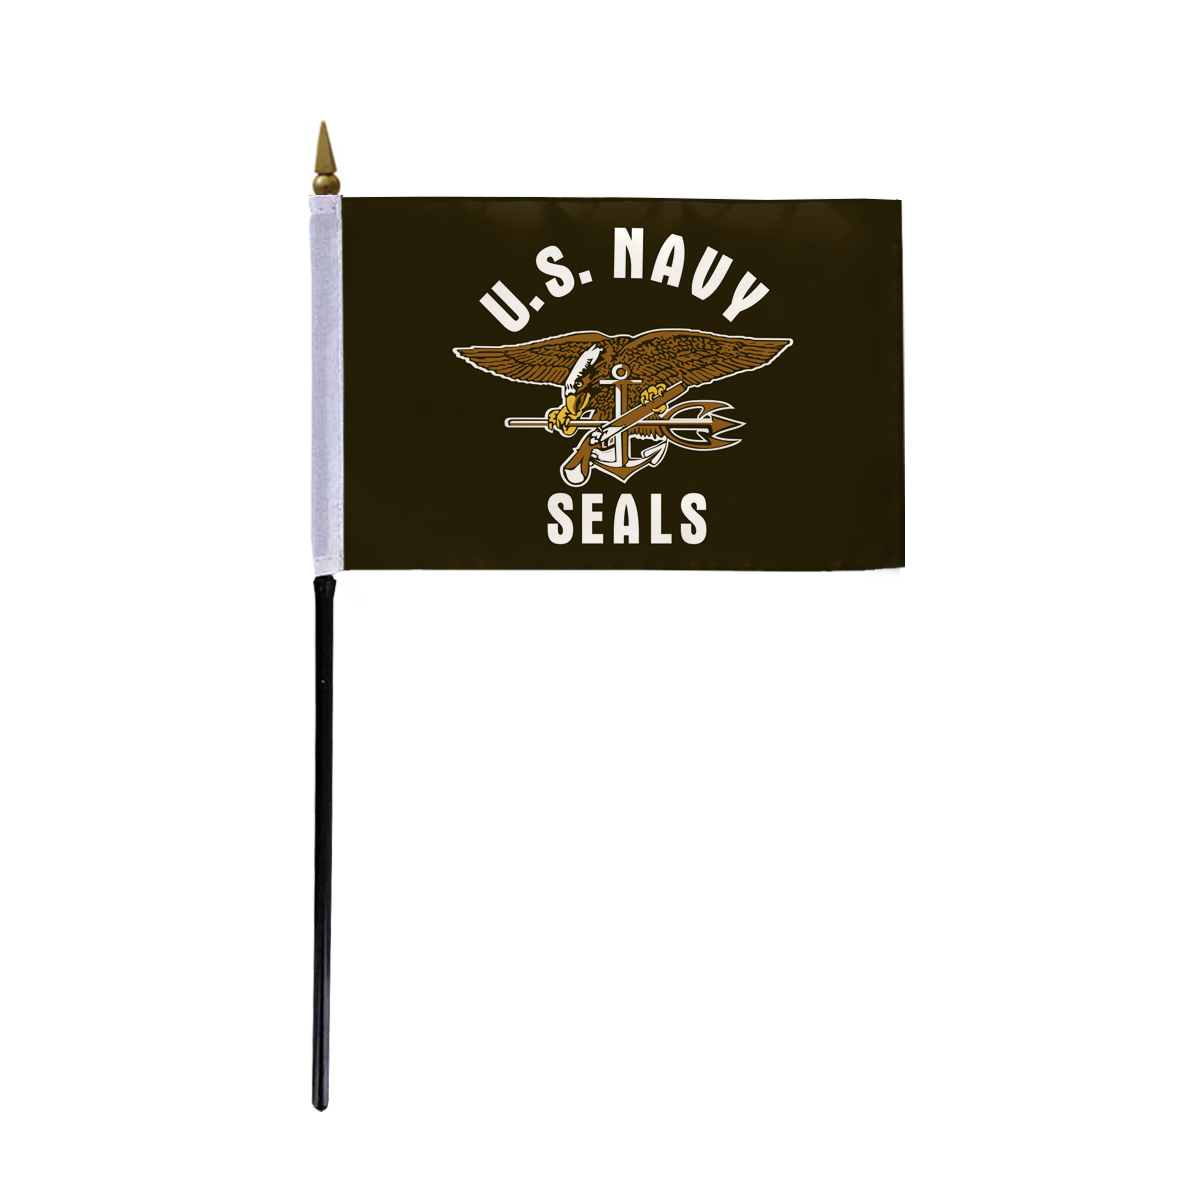 AGAS US Navy Seals Stick Flag - 4x6 inch - Special Military Flags